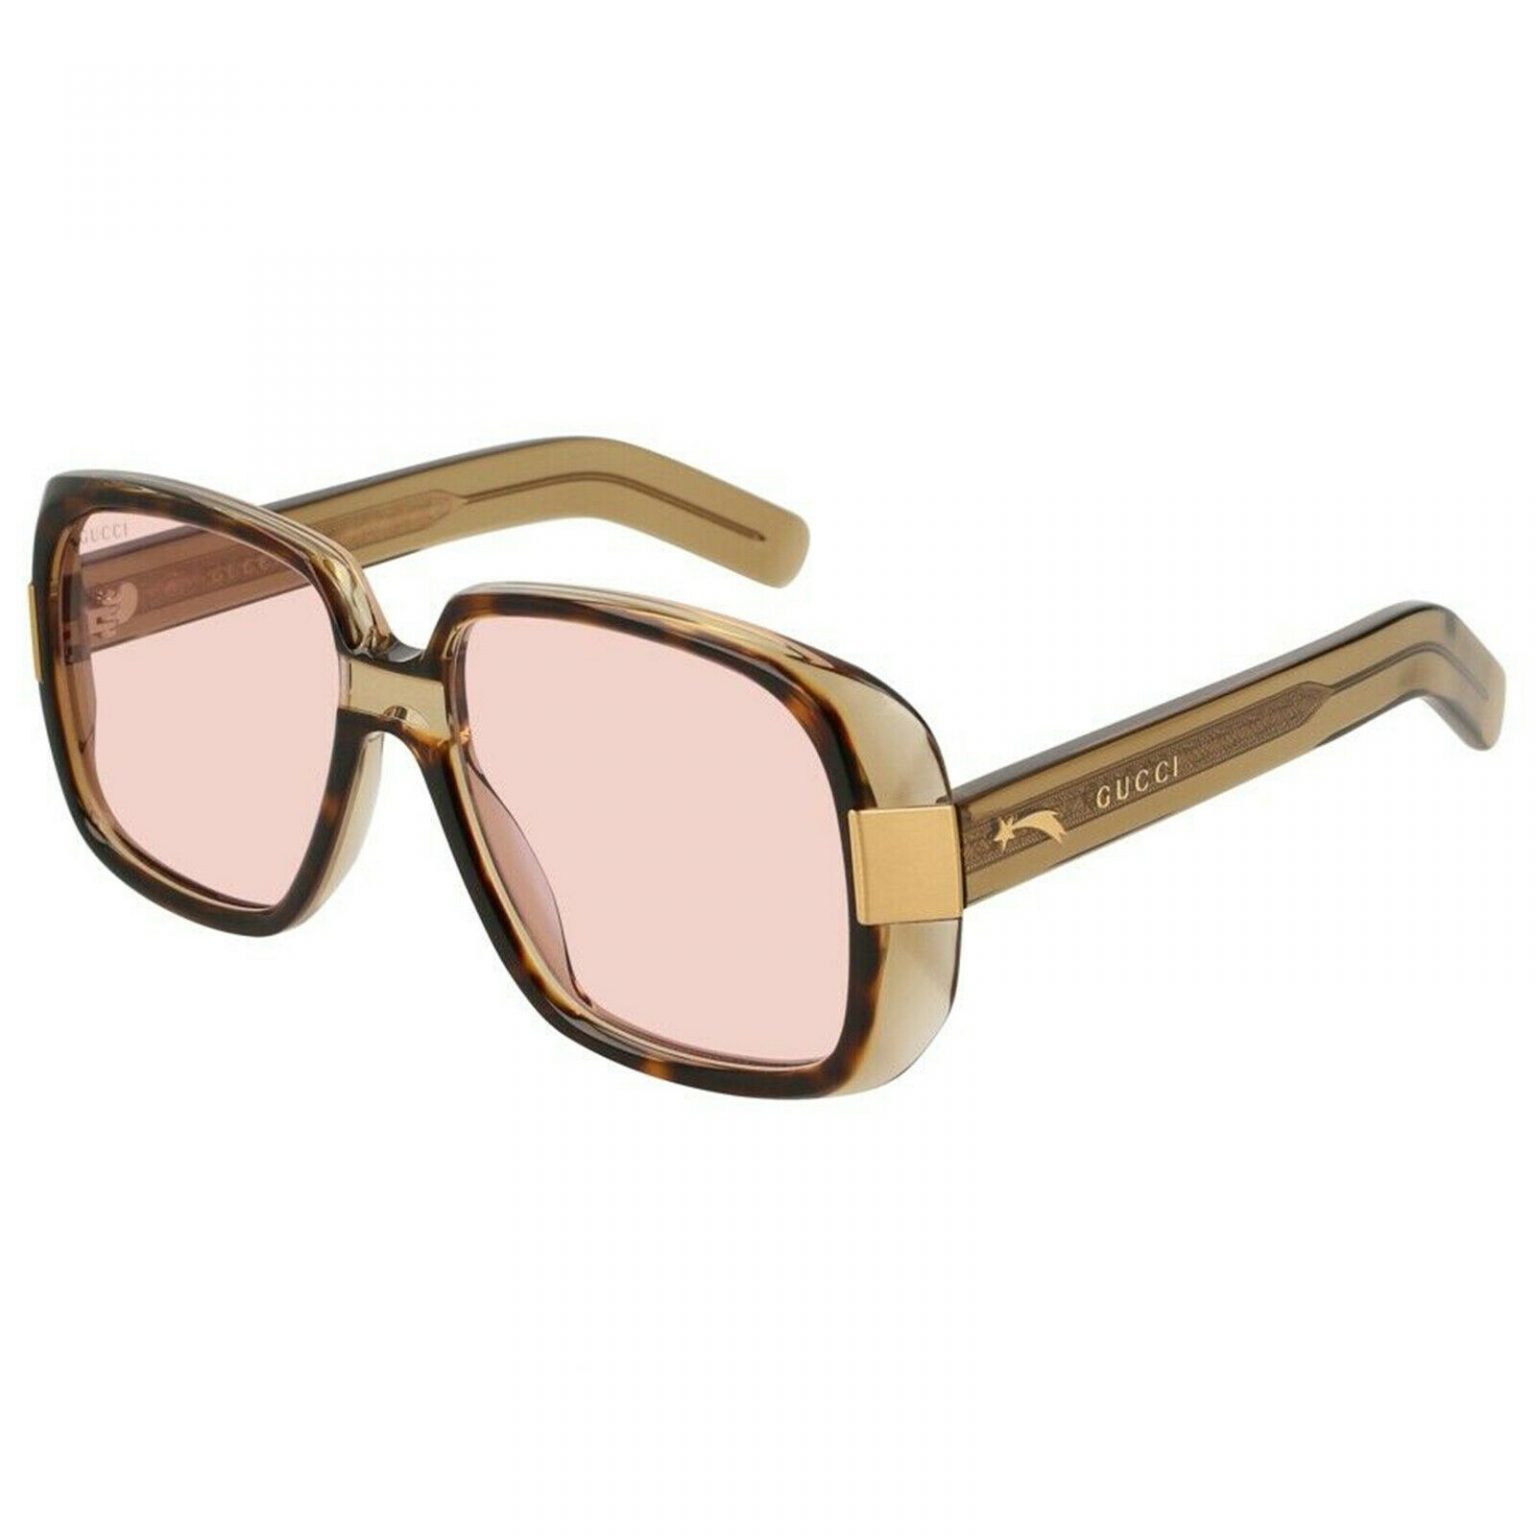 Gucci GG0200s 005 Clear & Gold Unisex Sunglasses See My Glasses